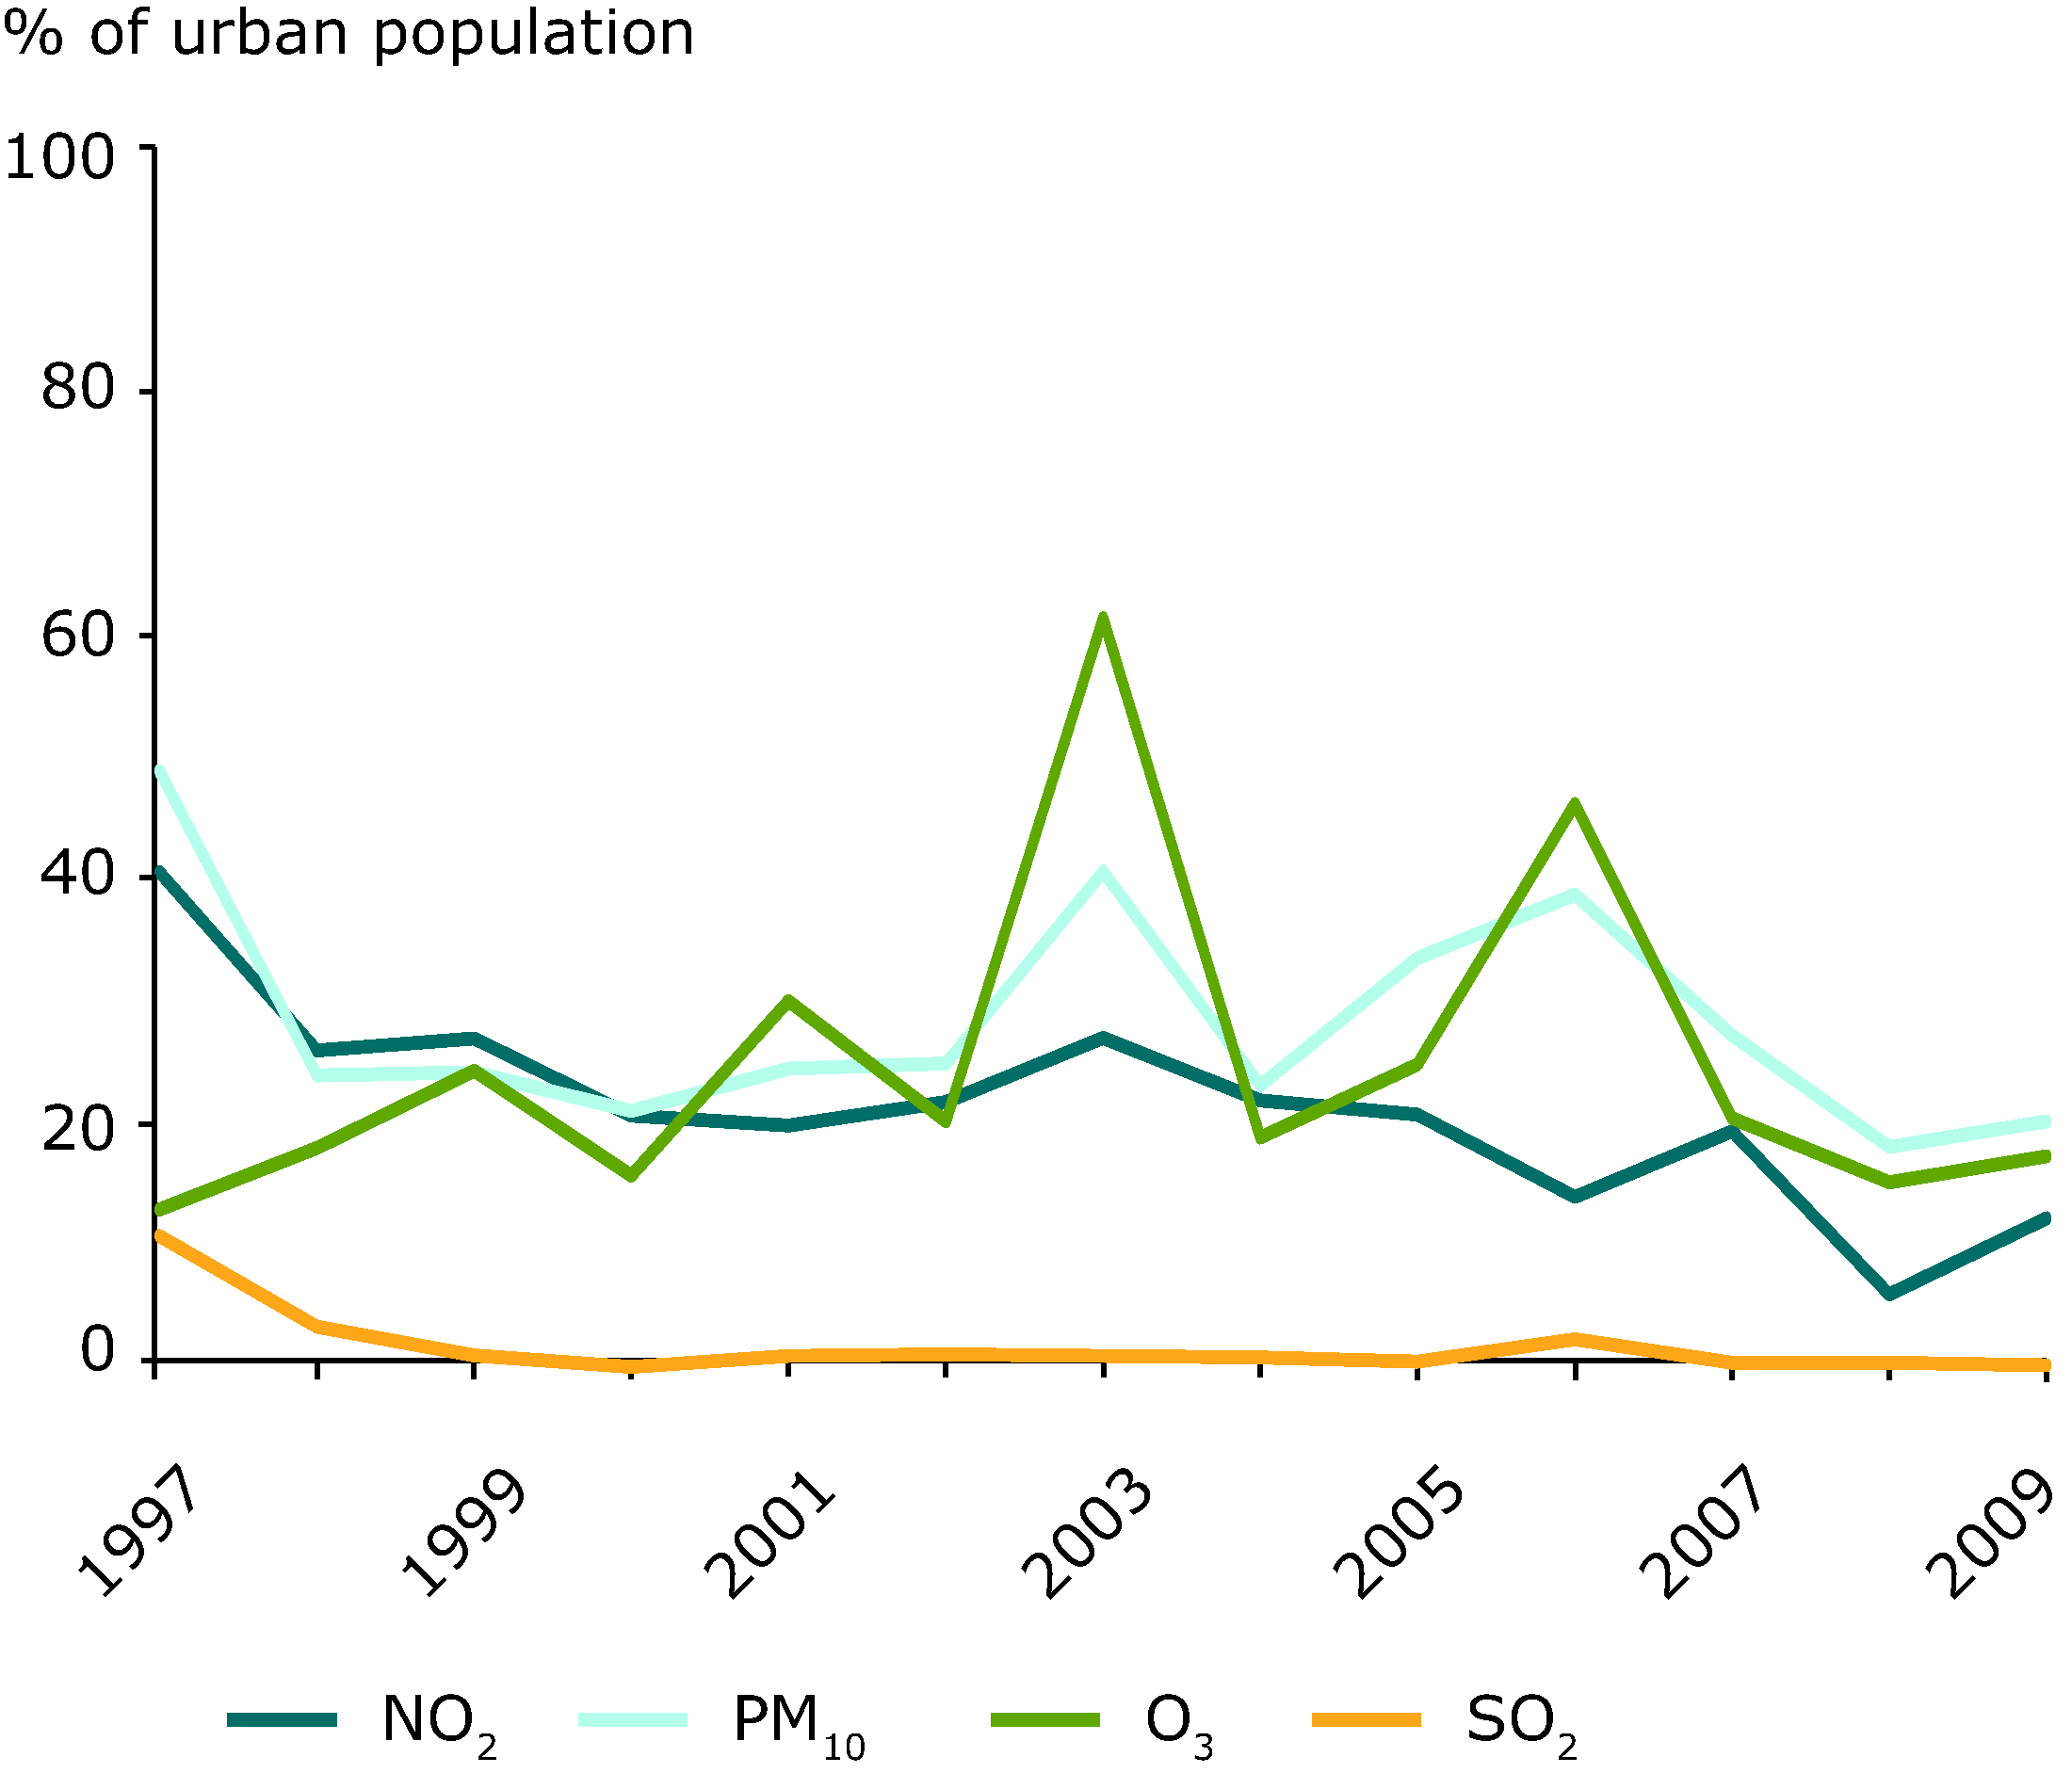 Percentage of urban population resident in areas where pollutant concentrations are higher than selected limit/target values, 1997-2009 (EU-27)